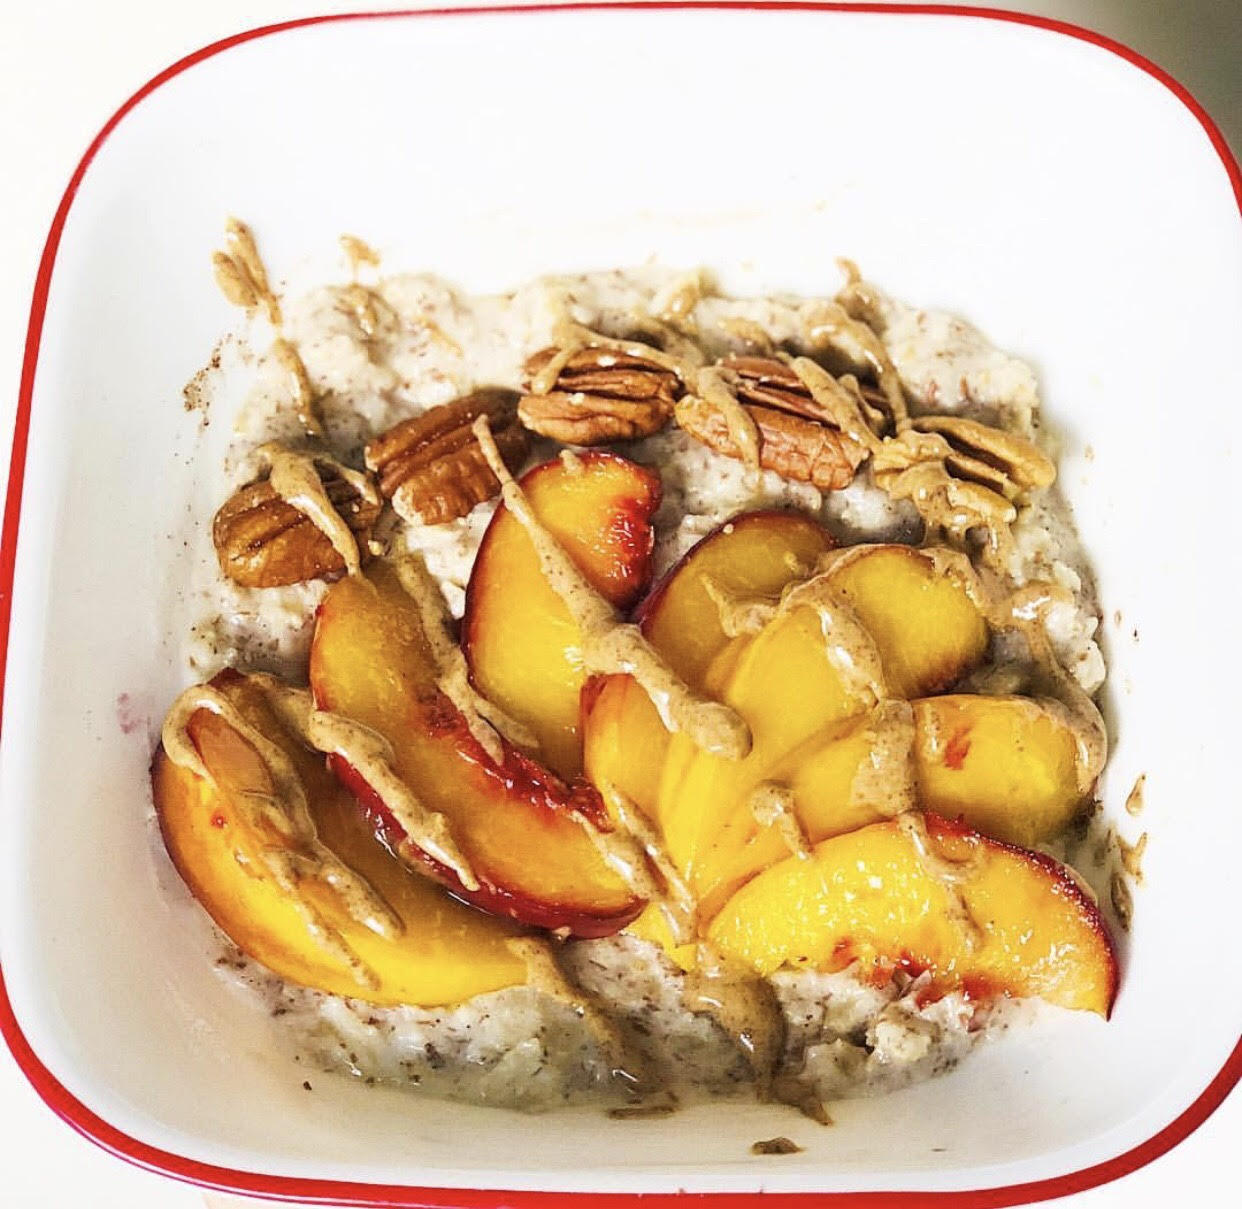 The perfect peach oats. Photo by Paige Wilson